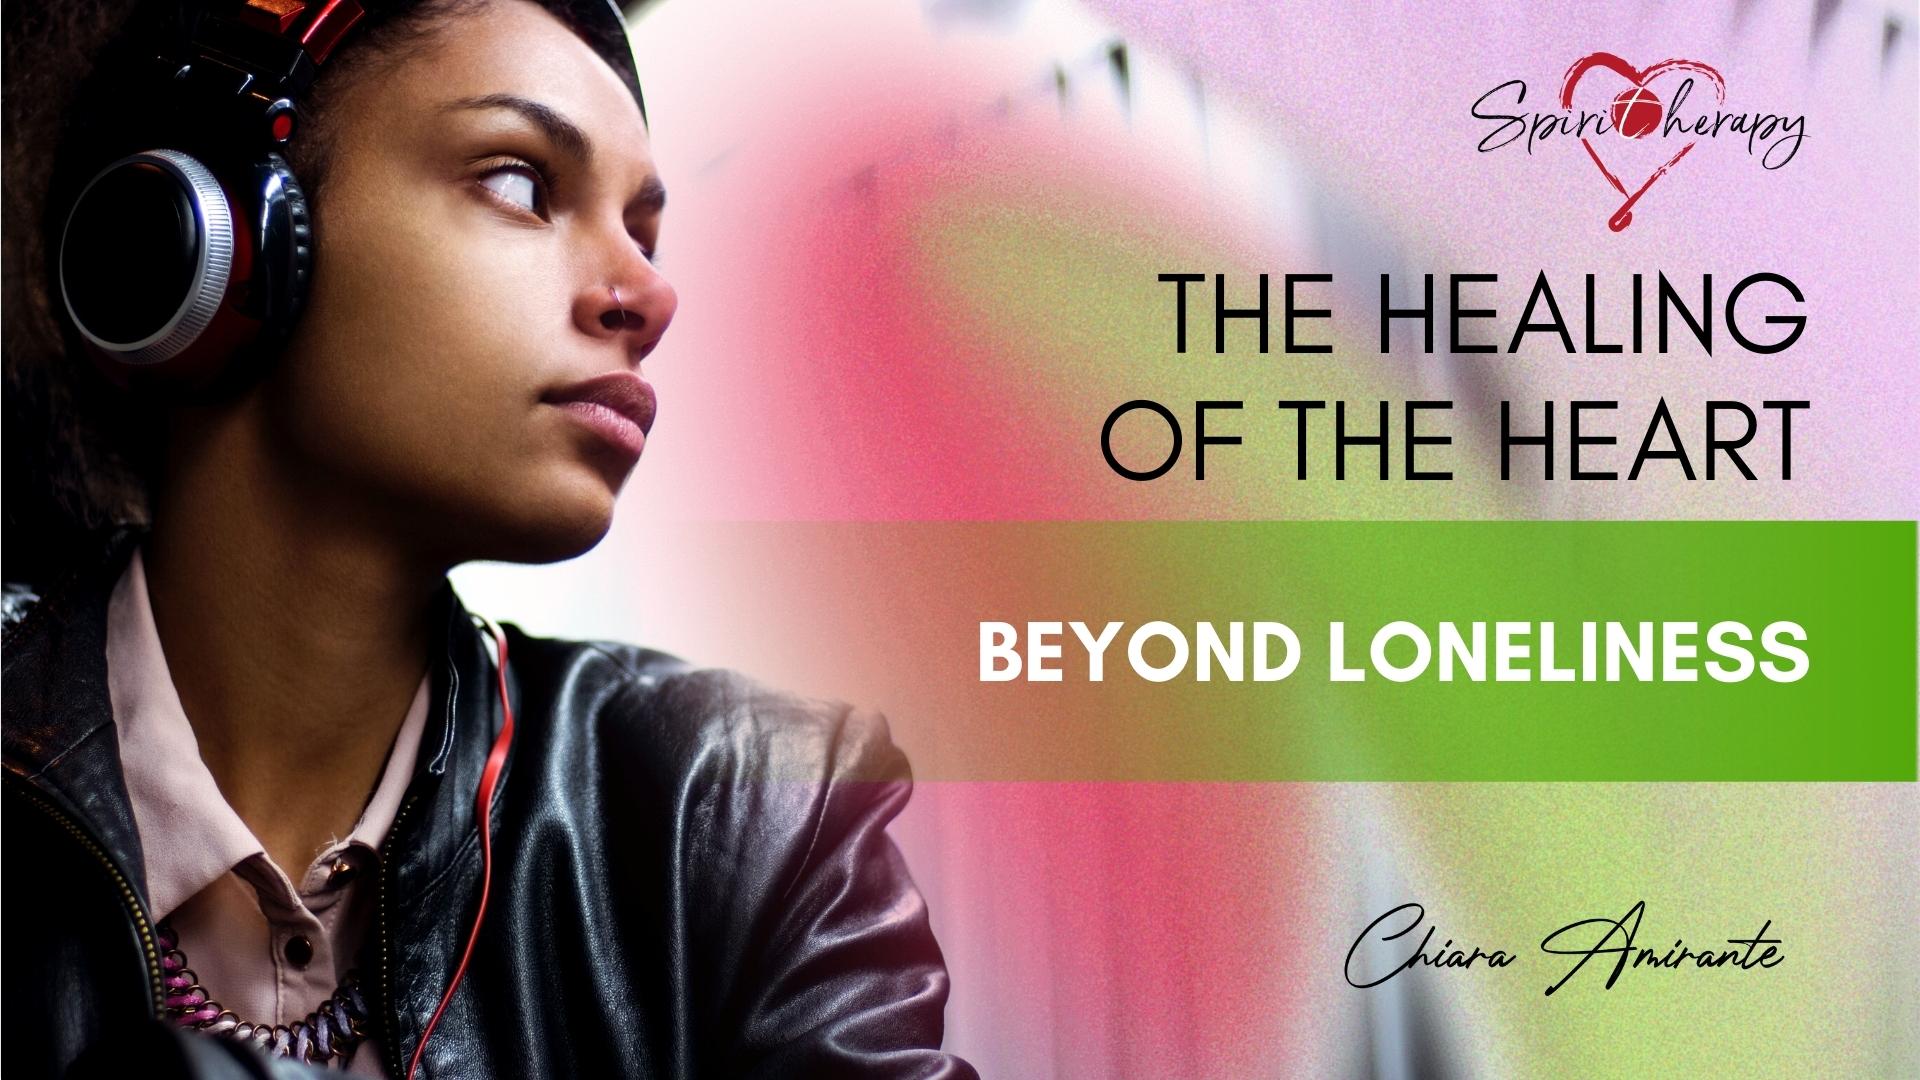 THE HEALING OF THE HEART - Beyond loneliness